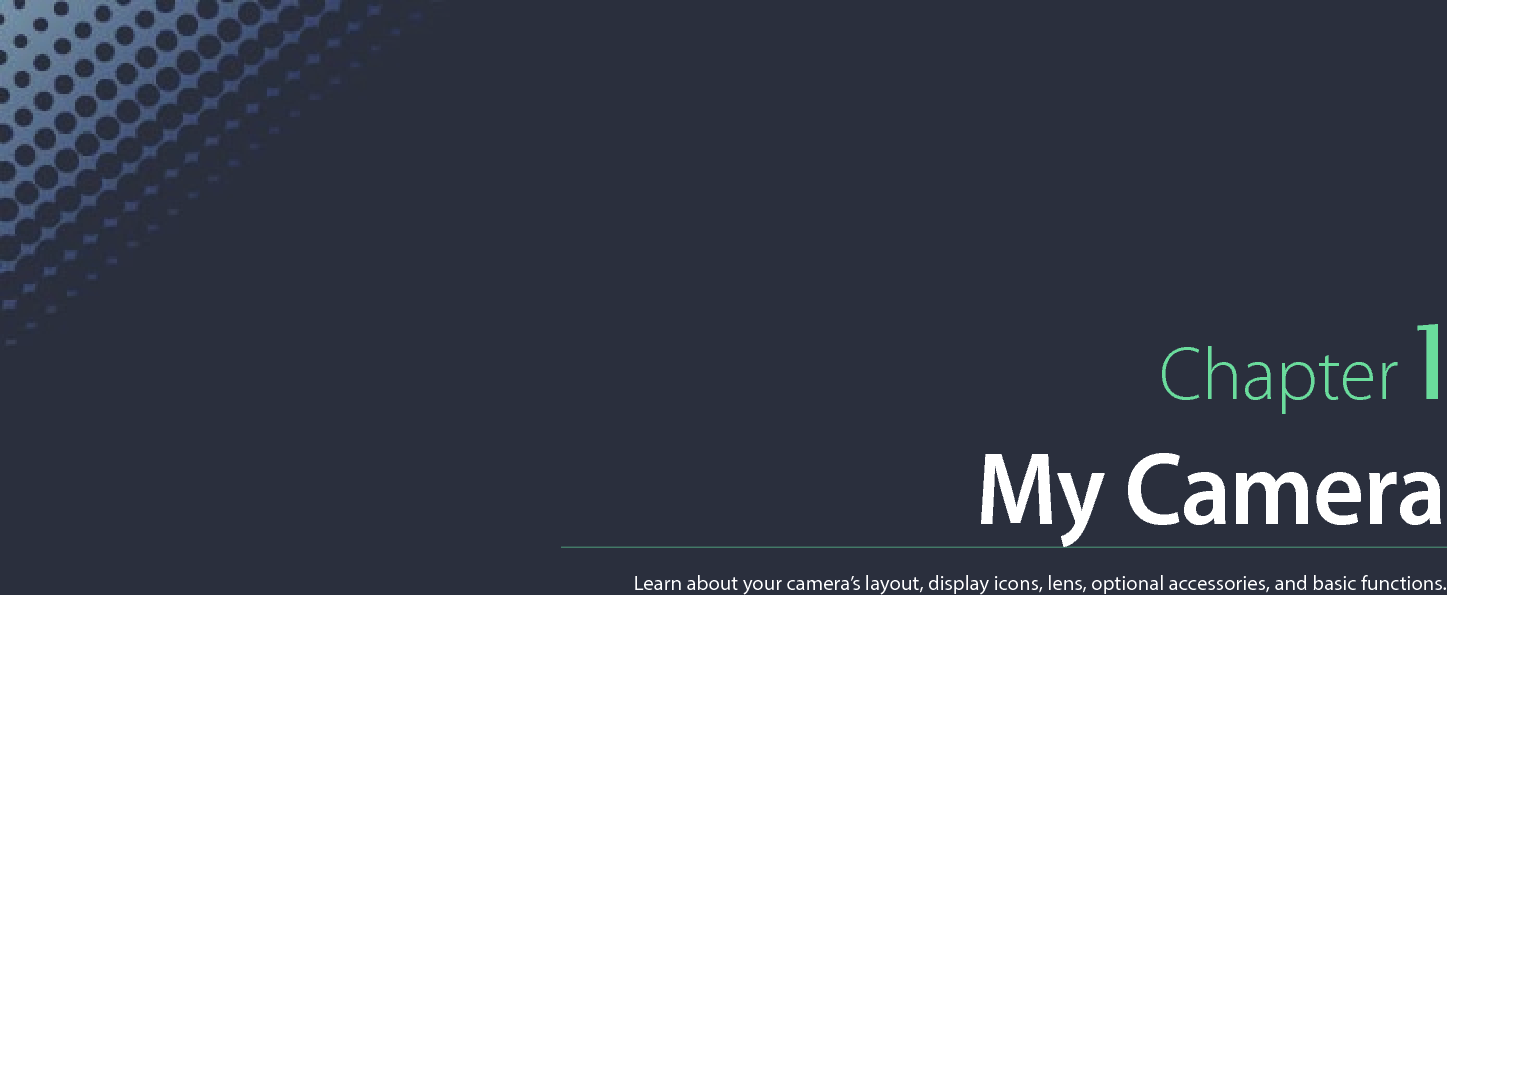 Chapter 1My CameraLearn about your camera’s layout, display icons, lens, optional accessories, and basic functions.